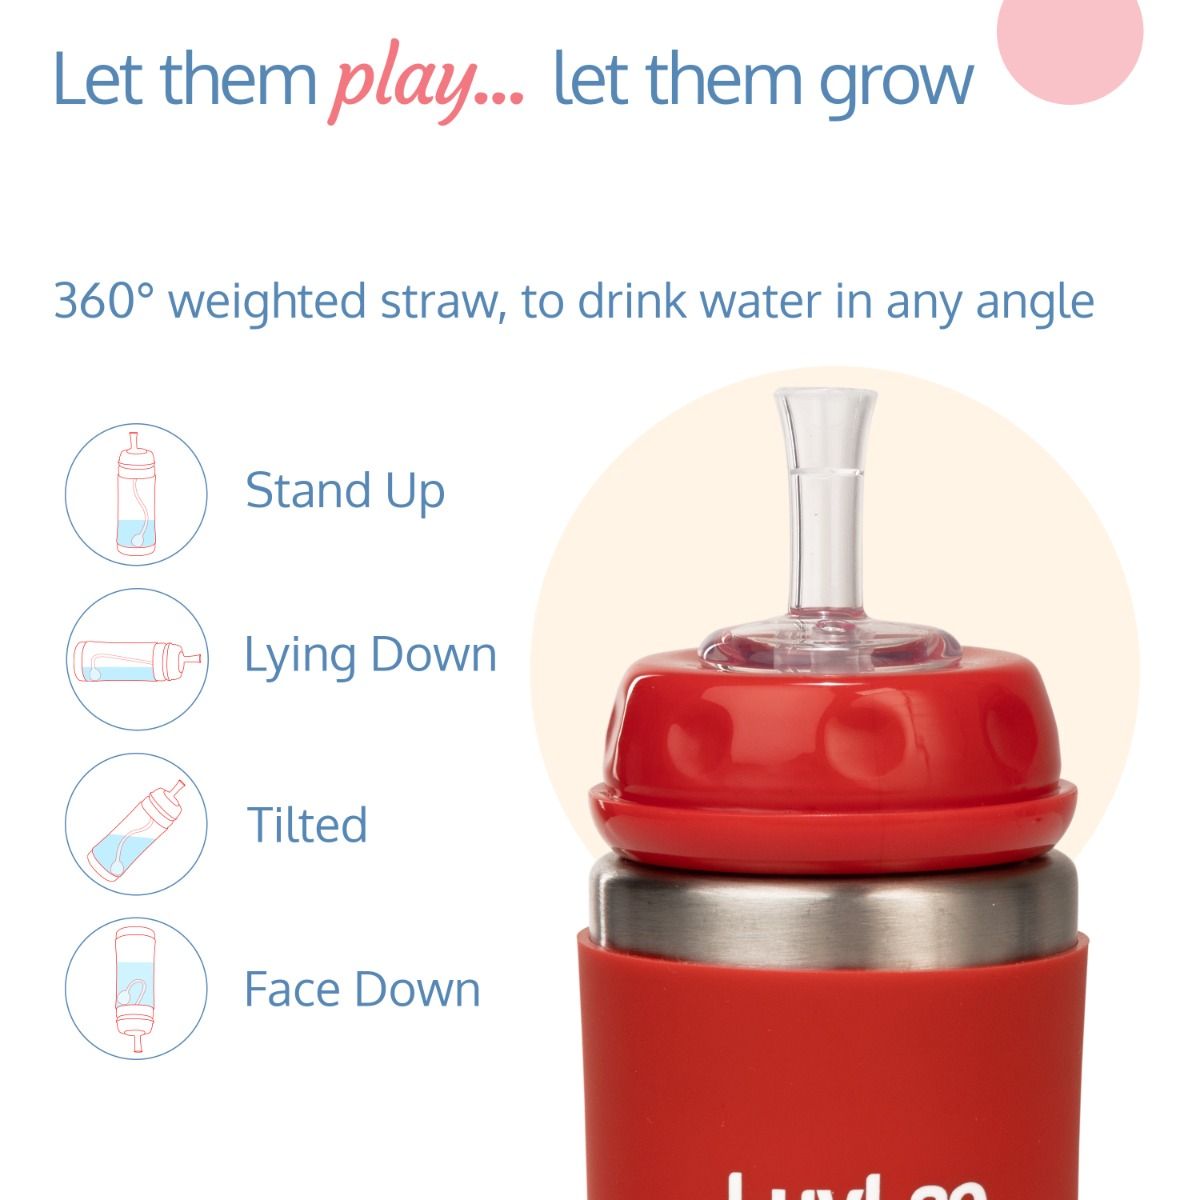 LuvLap 4-in-1 Stainless Steel Baby Bottle/Sipper, Anti-Colic, Odor-Free, with Handles, Attractive Prints 19424 - 240ml- Red